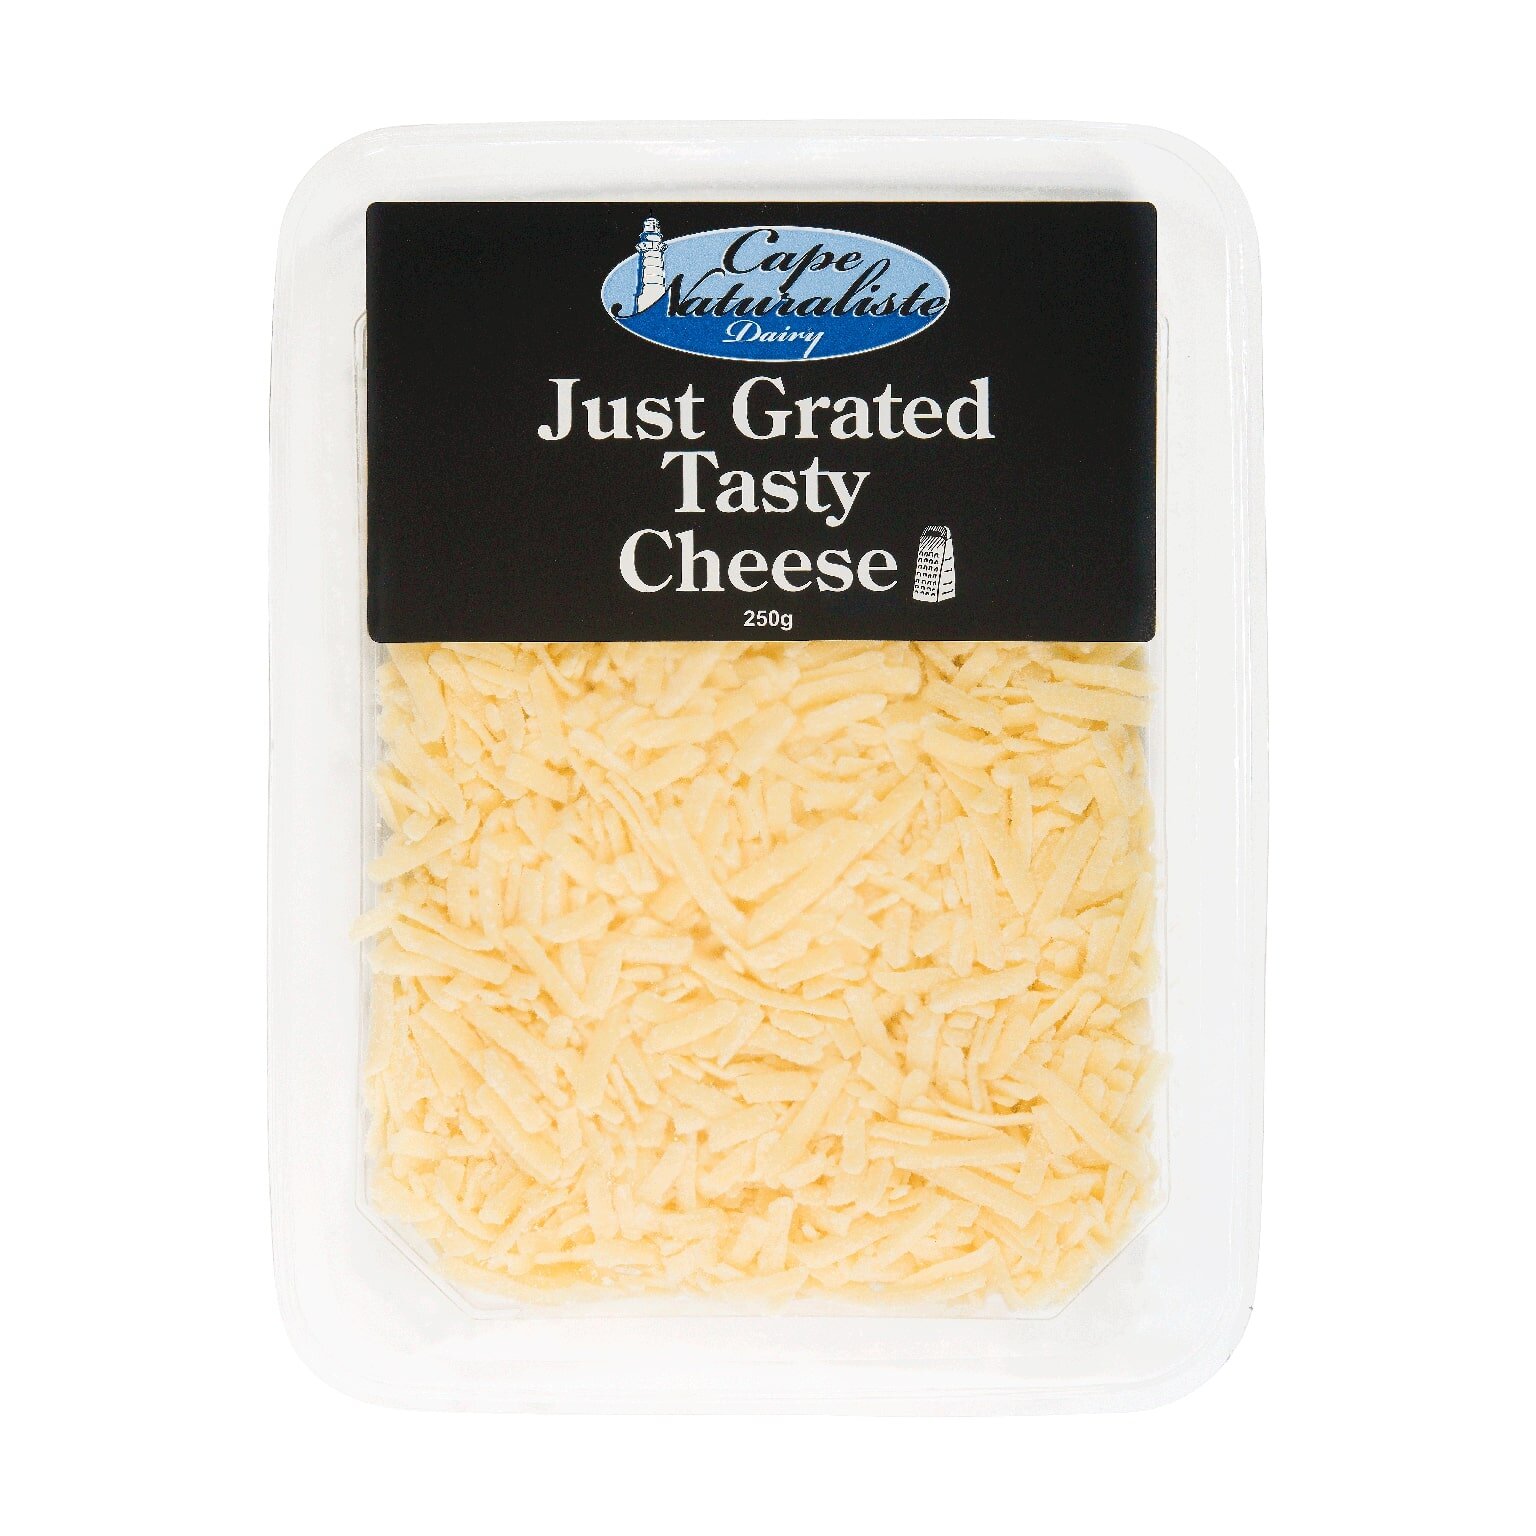 Just Grated Tasty 250g